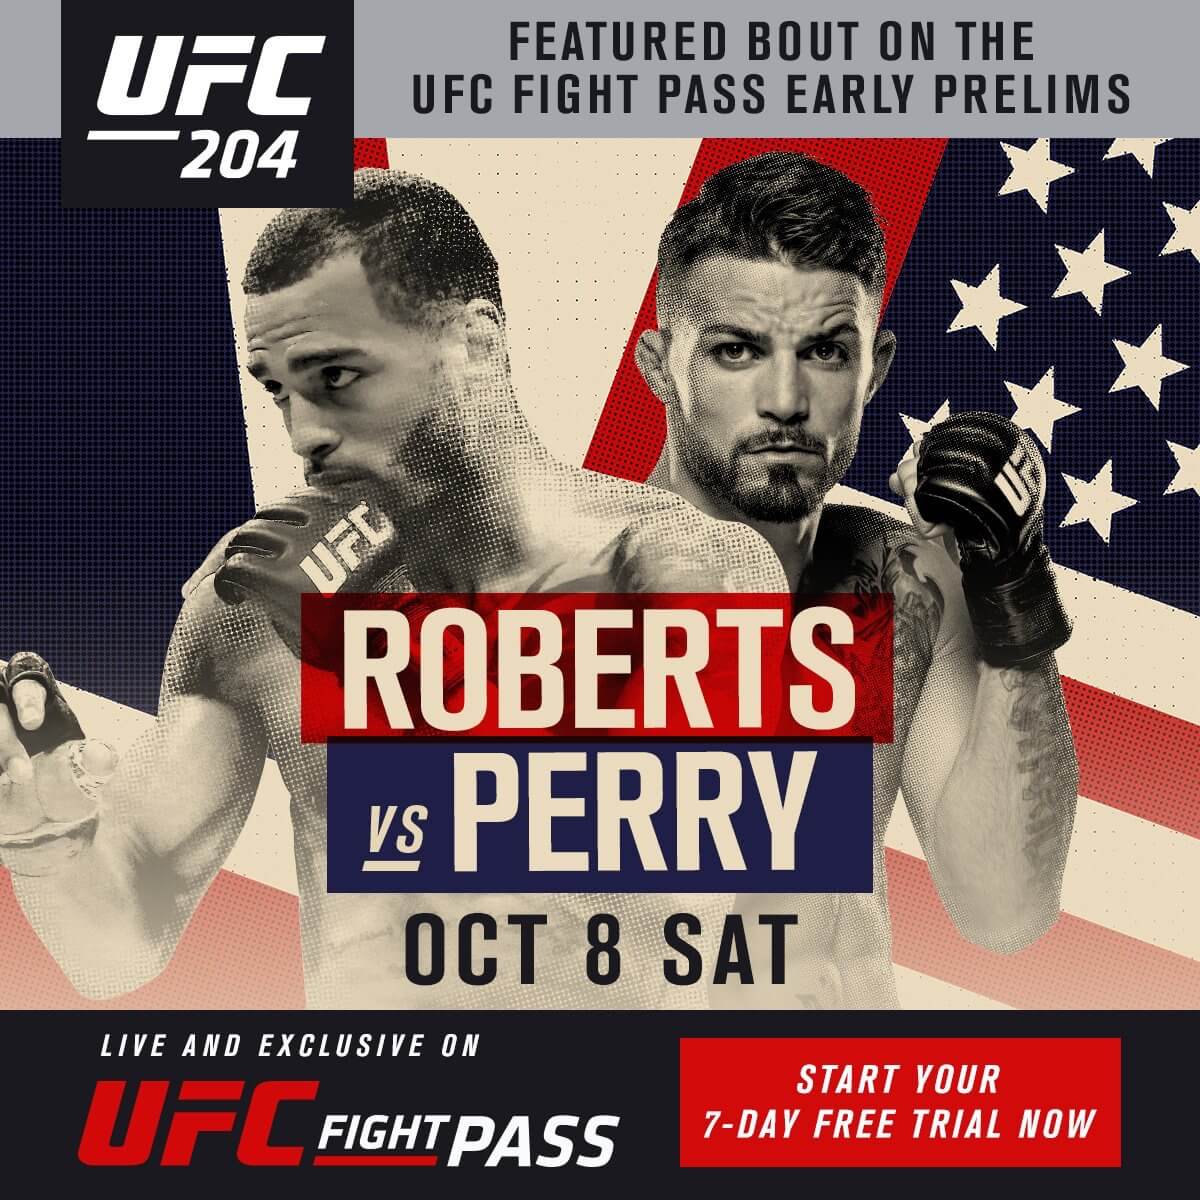 UFC 204 RESULTS - UFC 204 FREE LIVE STREAM of consciousness ONLINE - UFC Bisping vs Henderson 2 Results